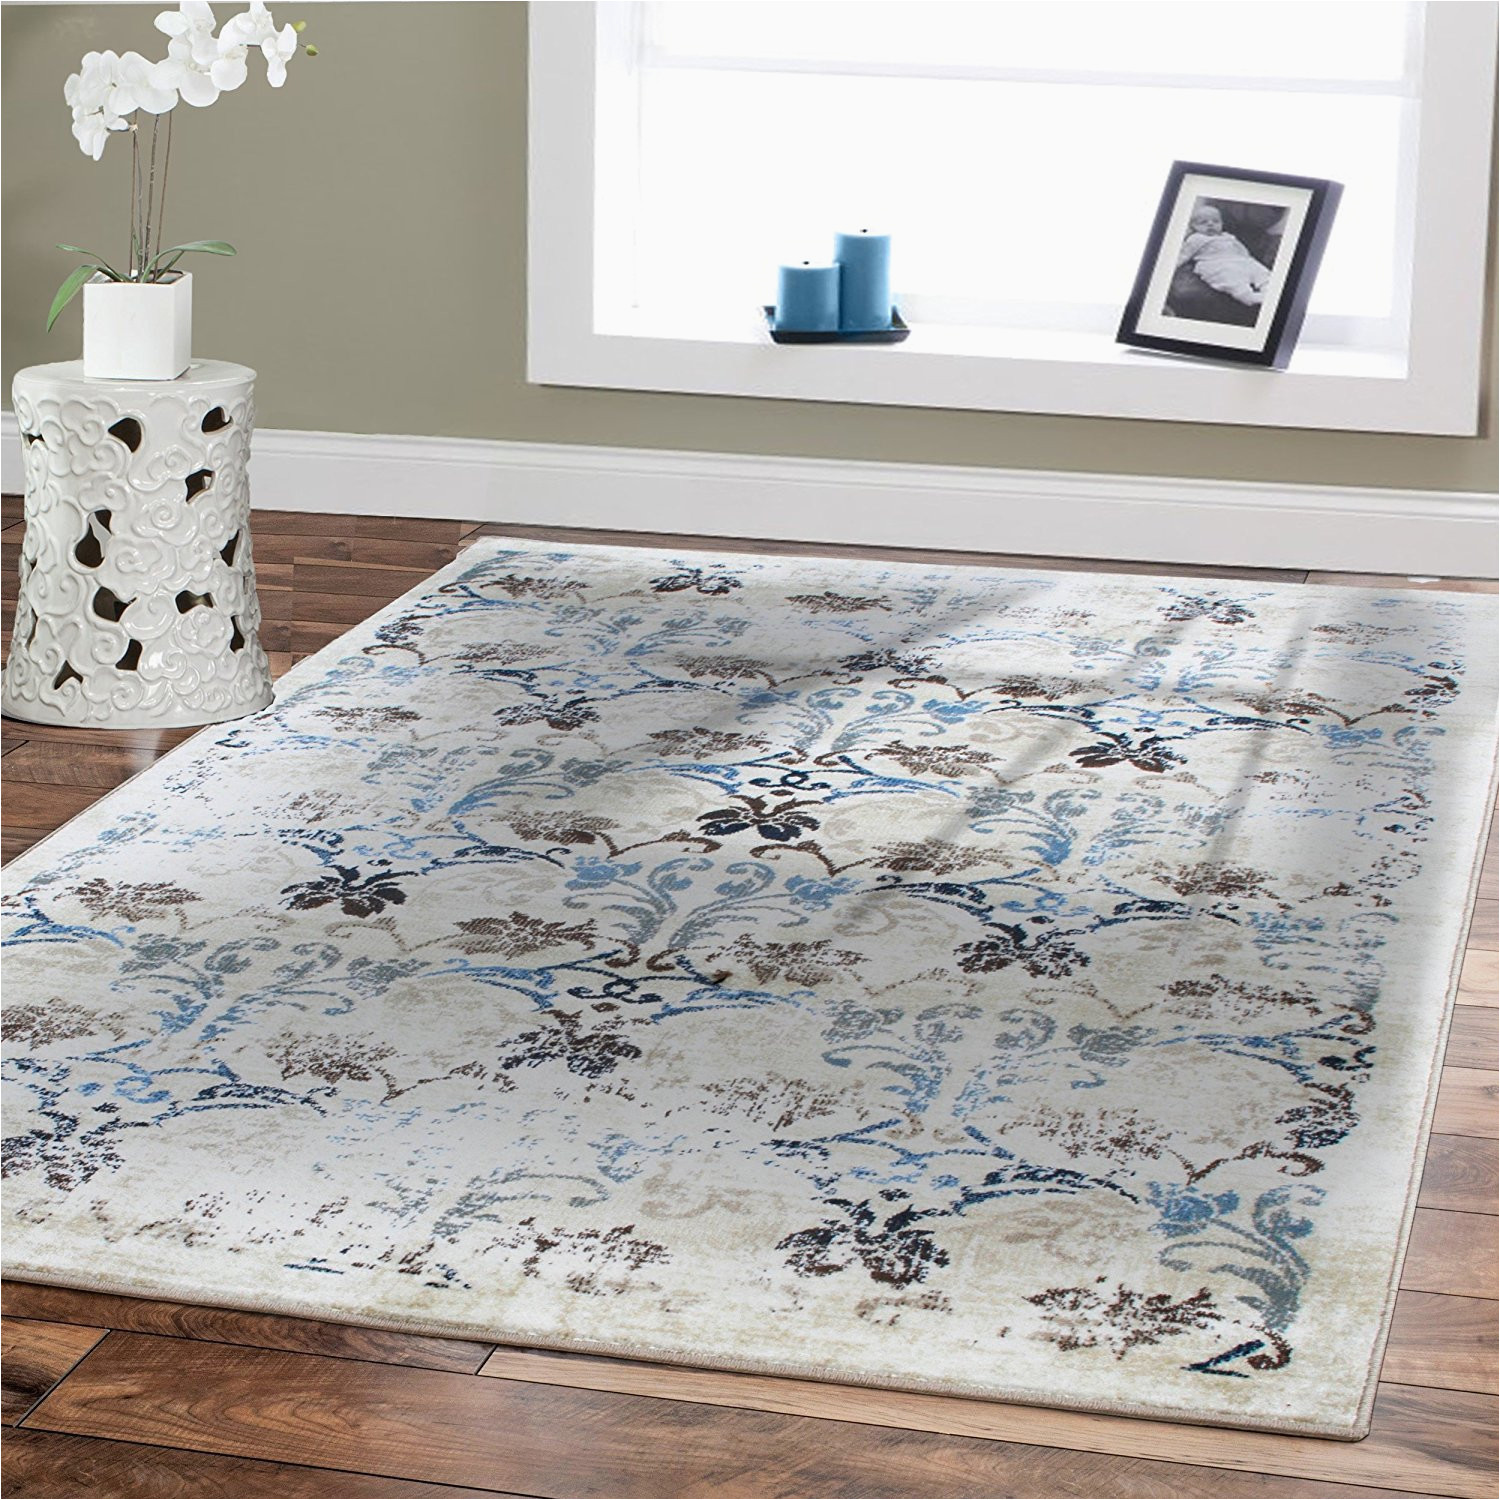 8 X 10 area Rugs Clearance Premium Rugs Dining Room Rug for Under the Table 8 by 10 Floor Rugs Clearance Cream 8×11 Distressed Rugs 8×10 area Rugs On Clearance